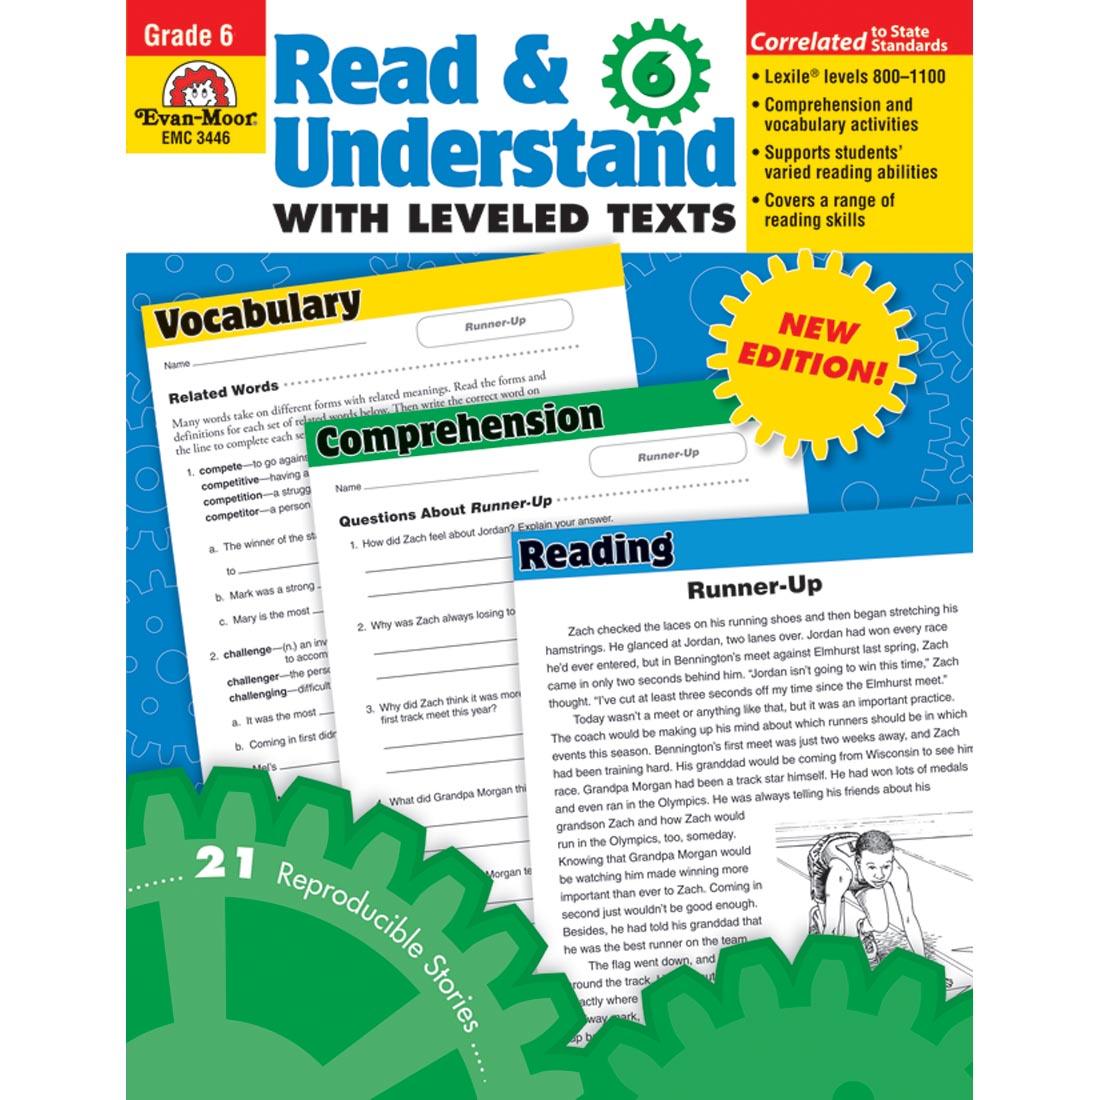 Grade 6 Read and Understand with Leveled Texts by Evan-Moor